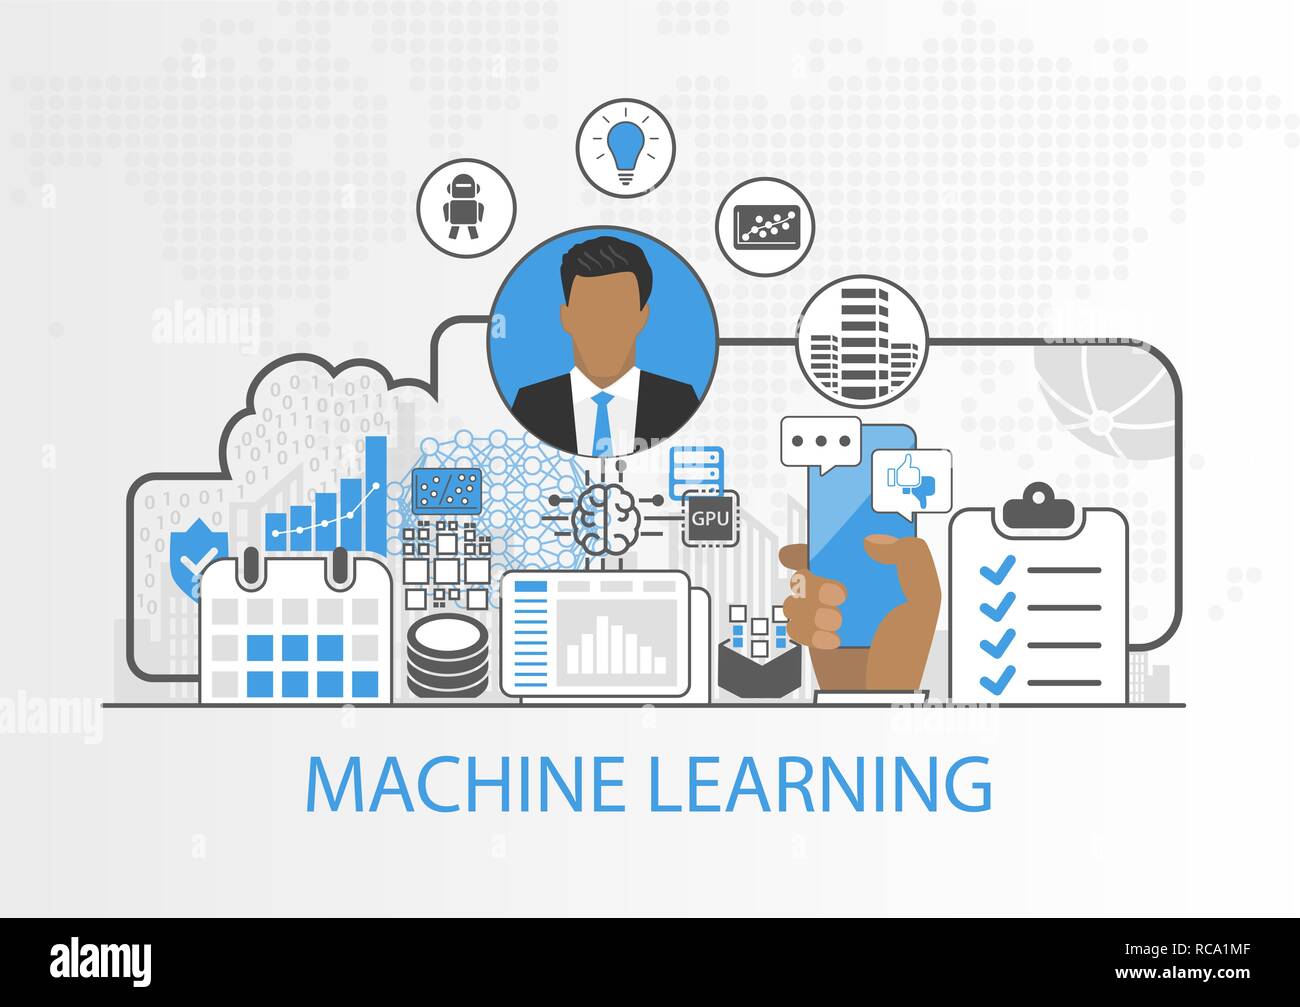 Machine learning vector illustration with business man and icons Stock Vector